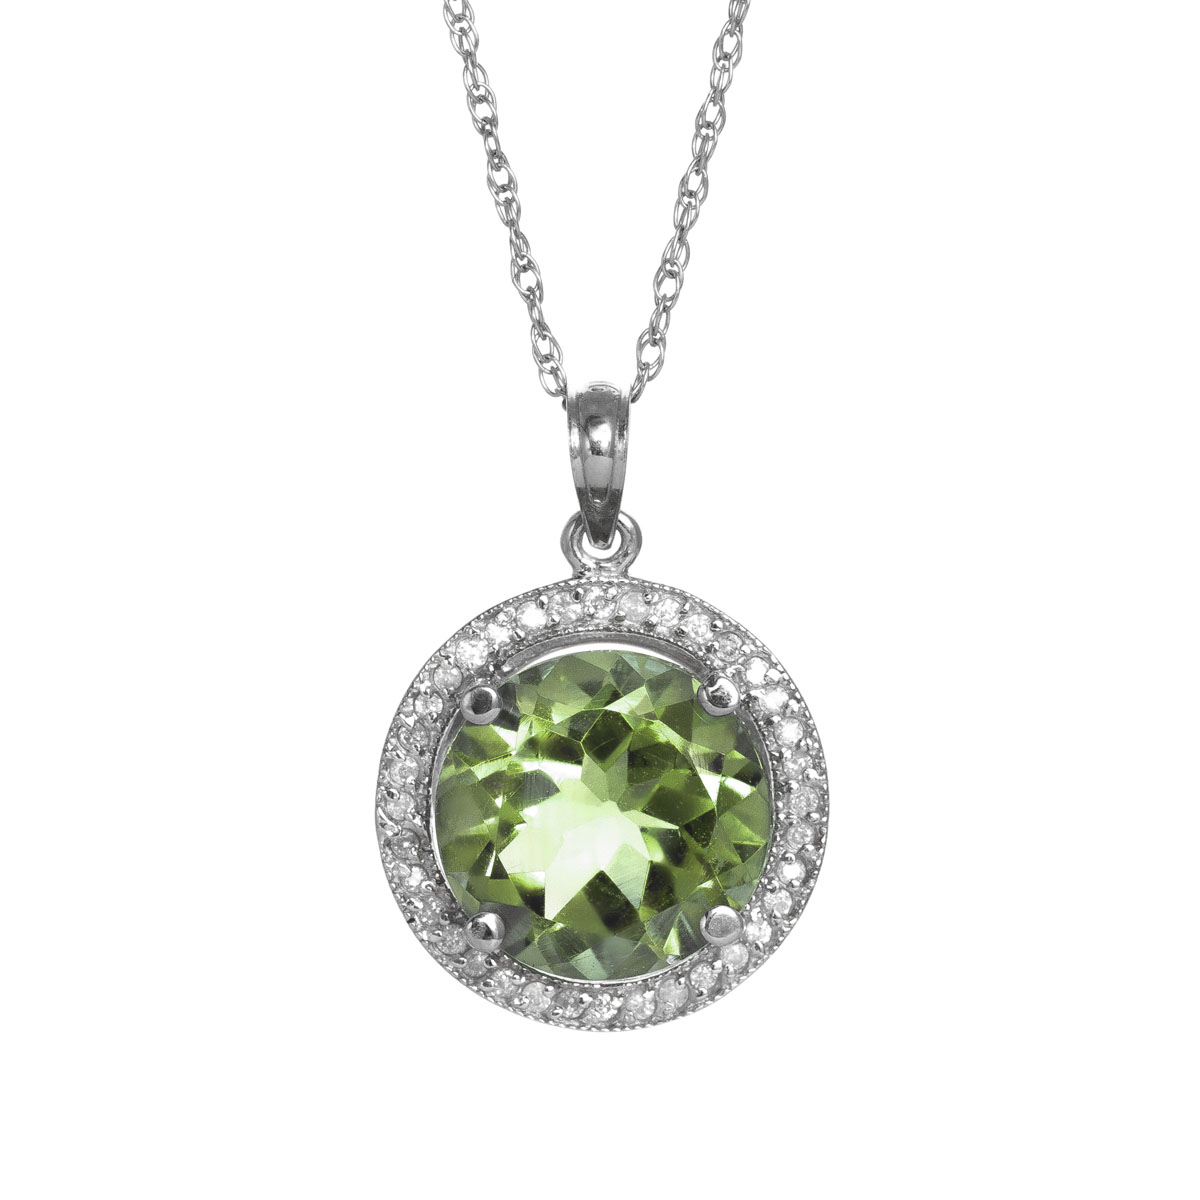 Green Amethyst Halo Pendant Necklace 5.2 ctw in 9ct White Gold